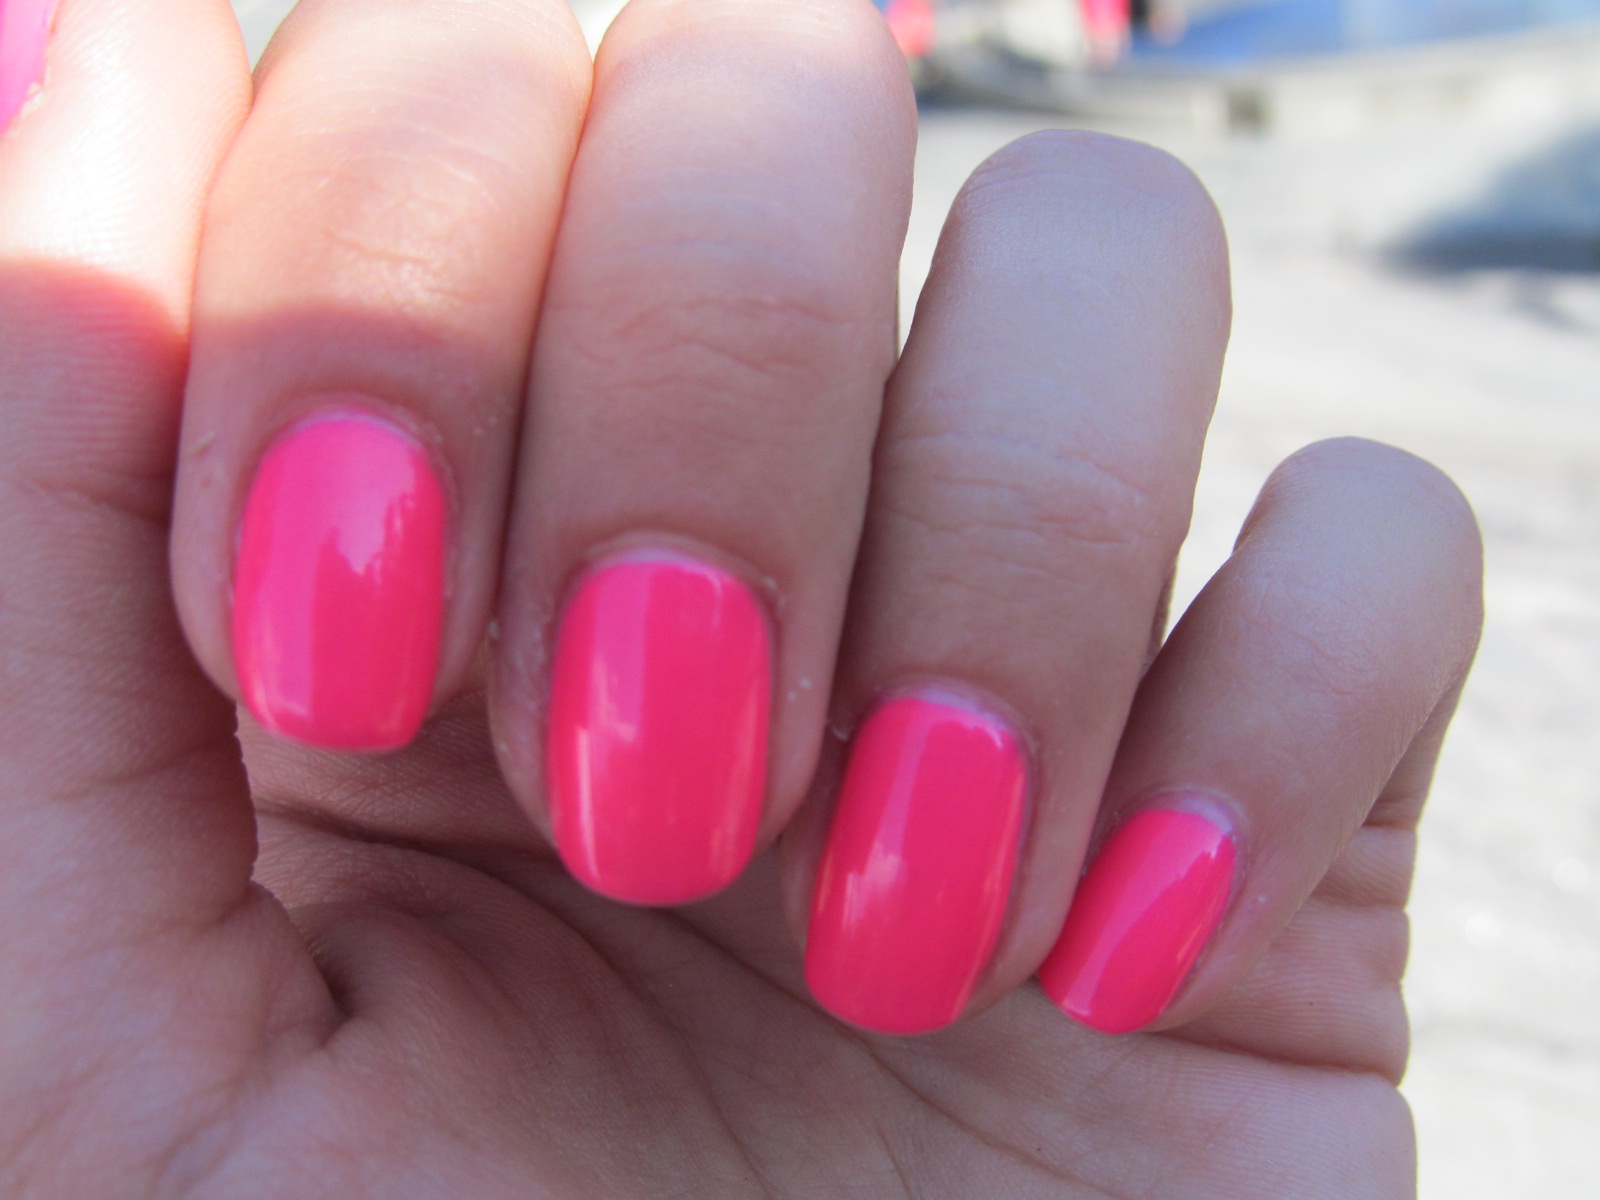 3. Sinful Colors Gel Nail Polish in Pink Forever - wide 1